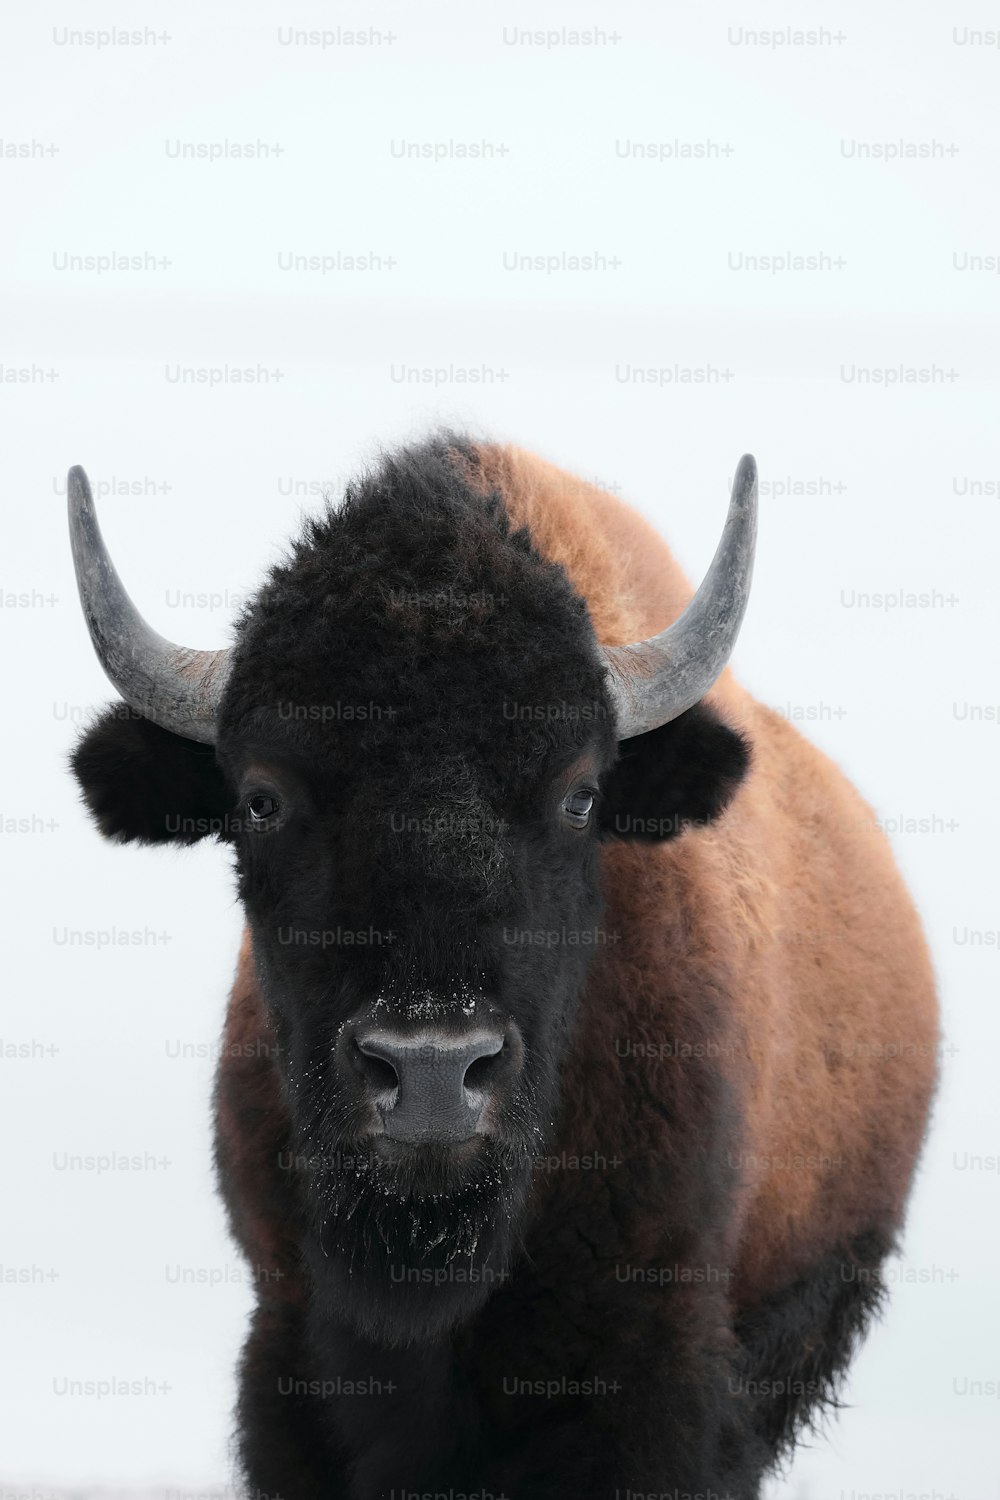 a bison with large horns standing in a field